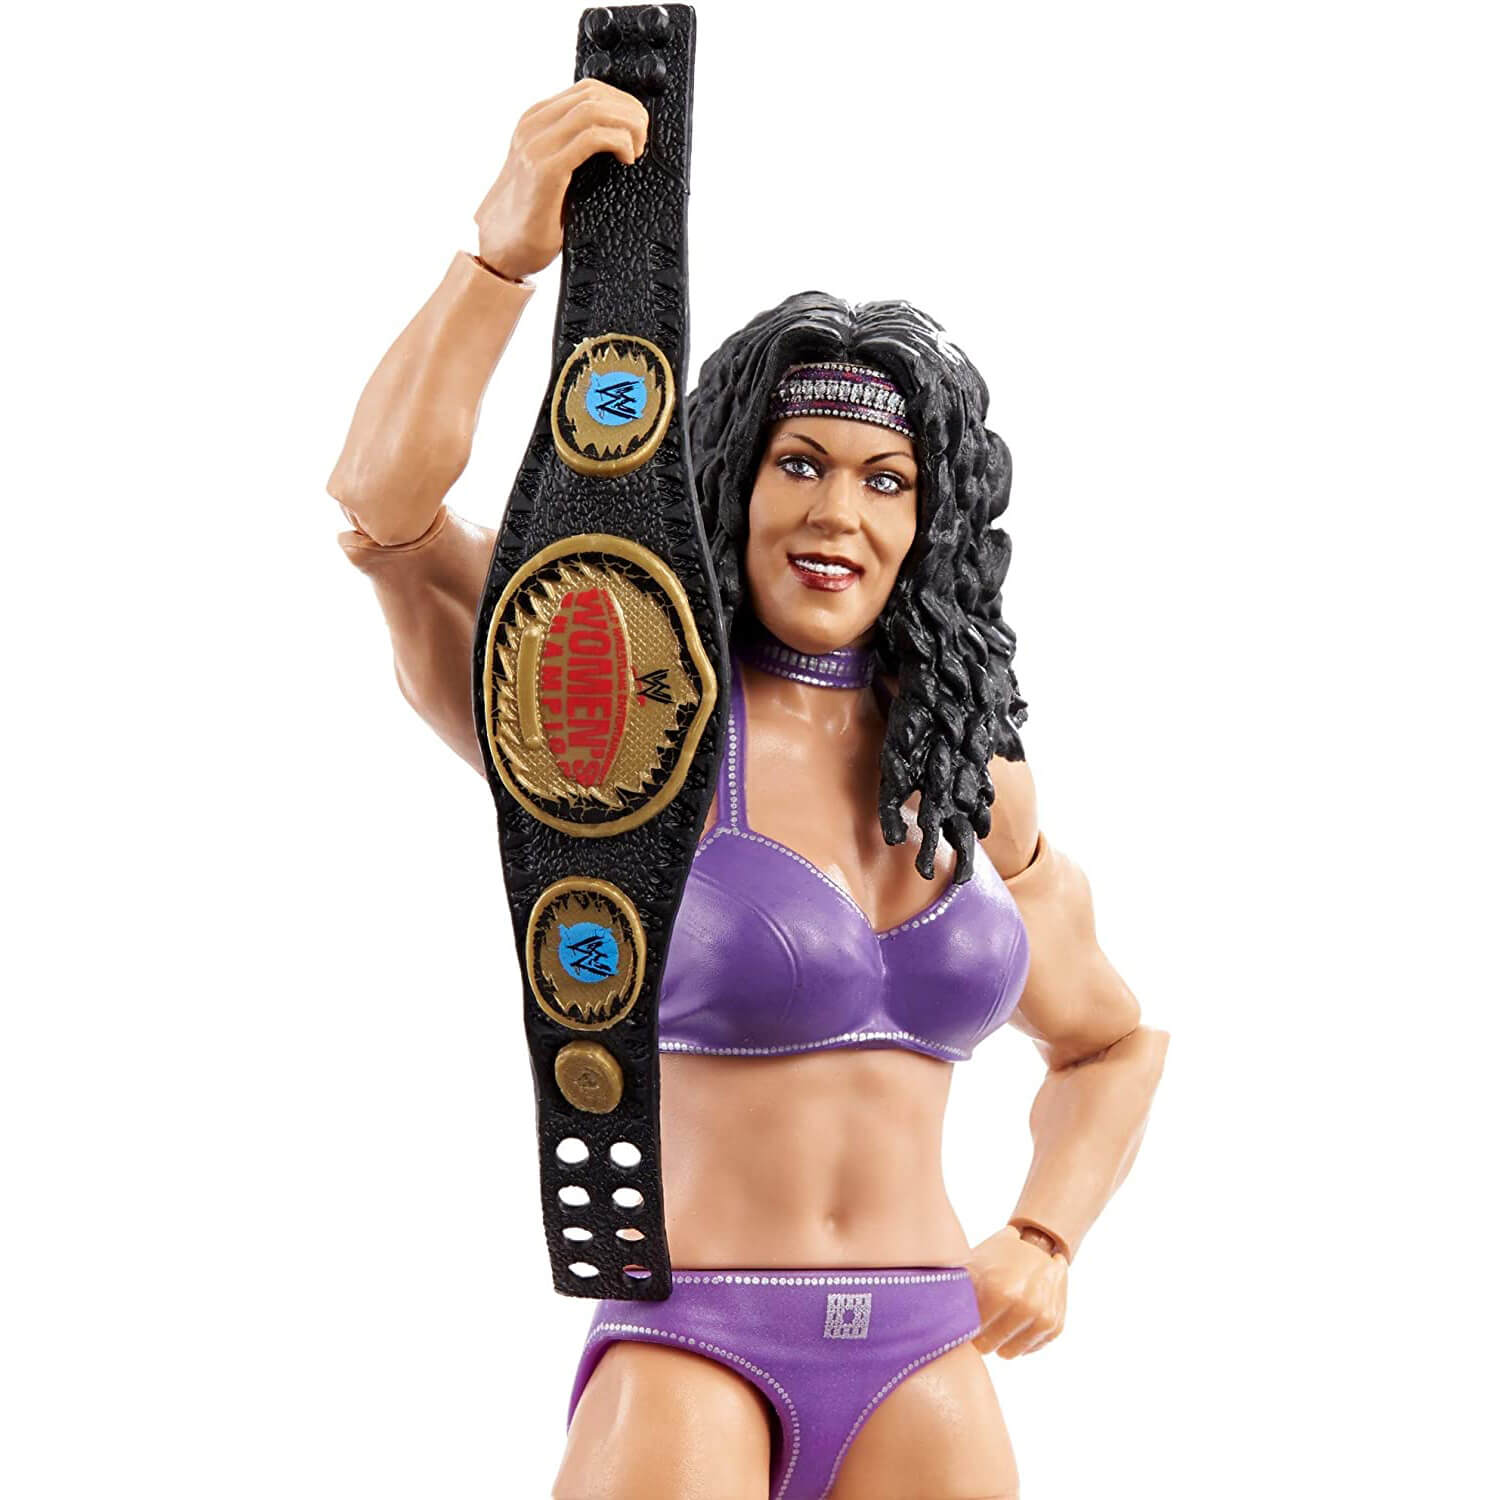 WWE WrestleMania Elite Collection Chyna Collectible Action Figure